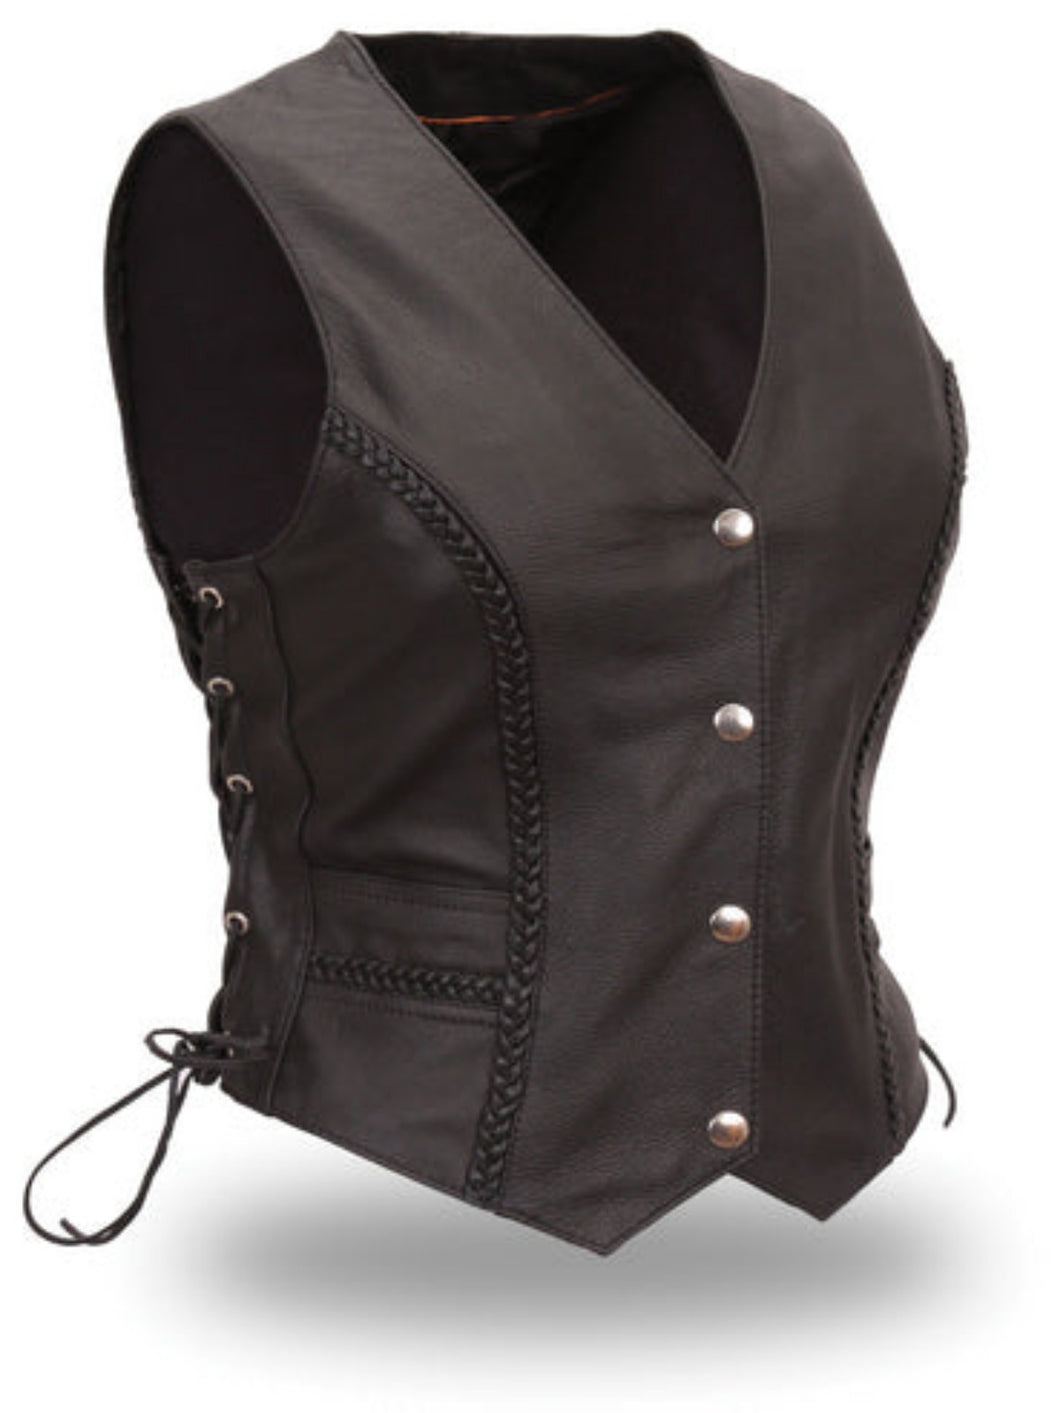 Women's Braided Black Leather Motorcycle Vest